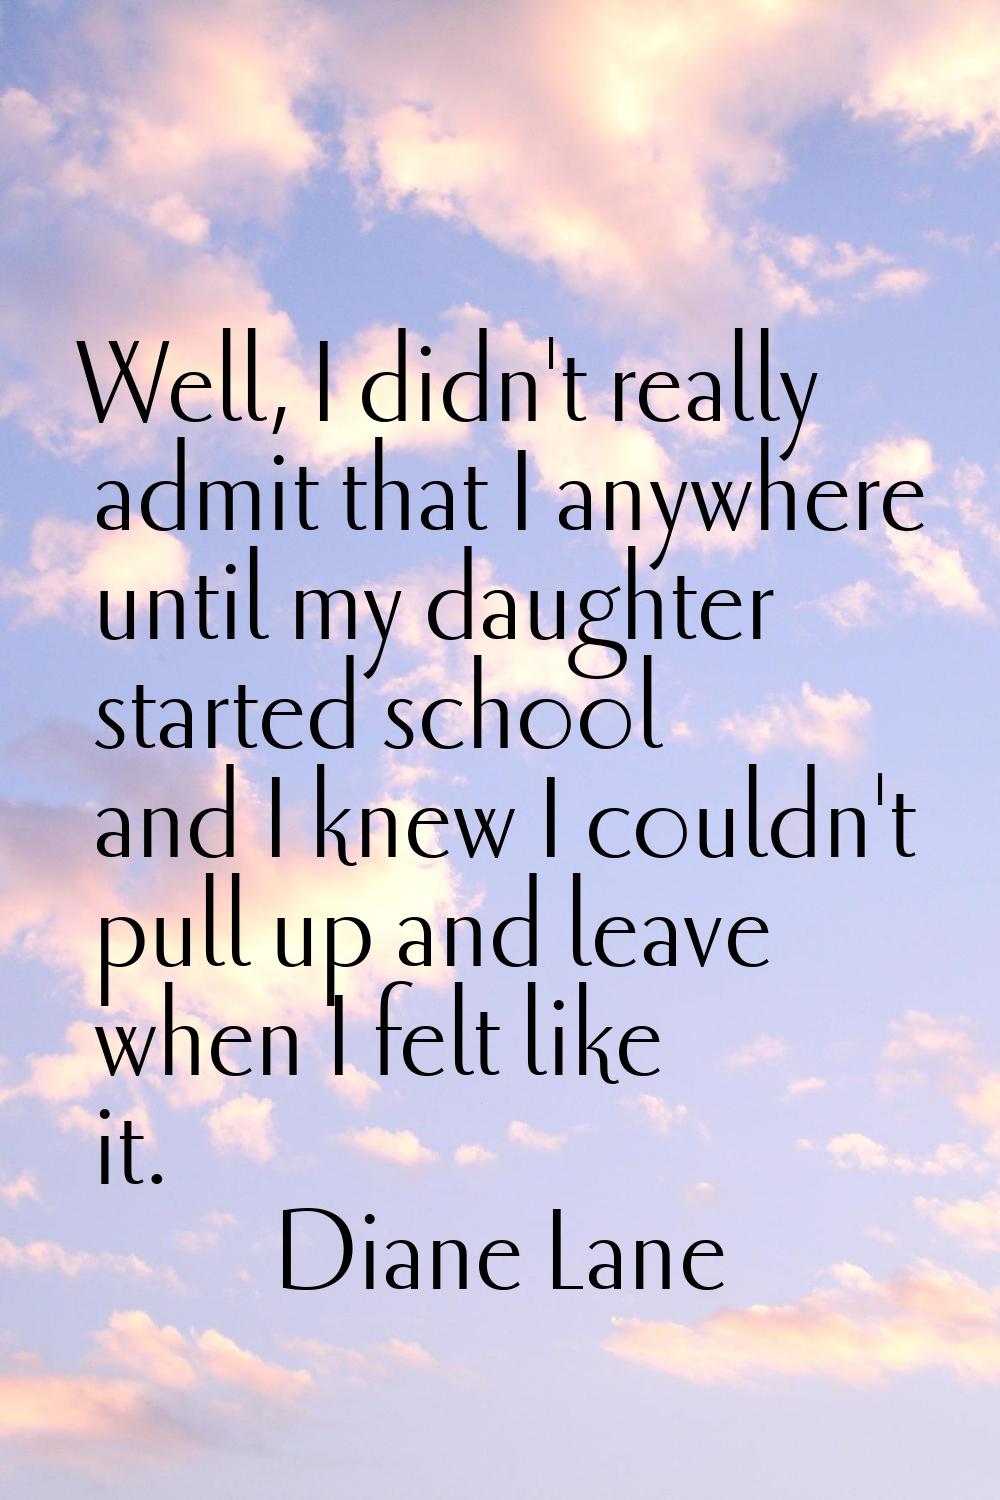 Well, I didn't really admit that I anywhere until my daughter started school and I knew I couldn't 